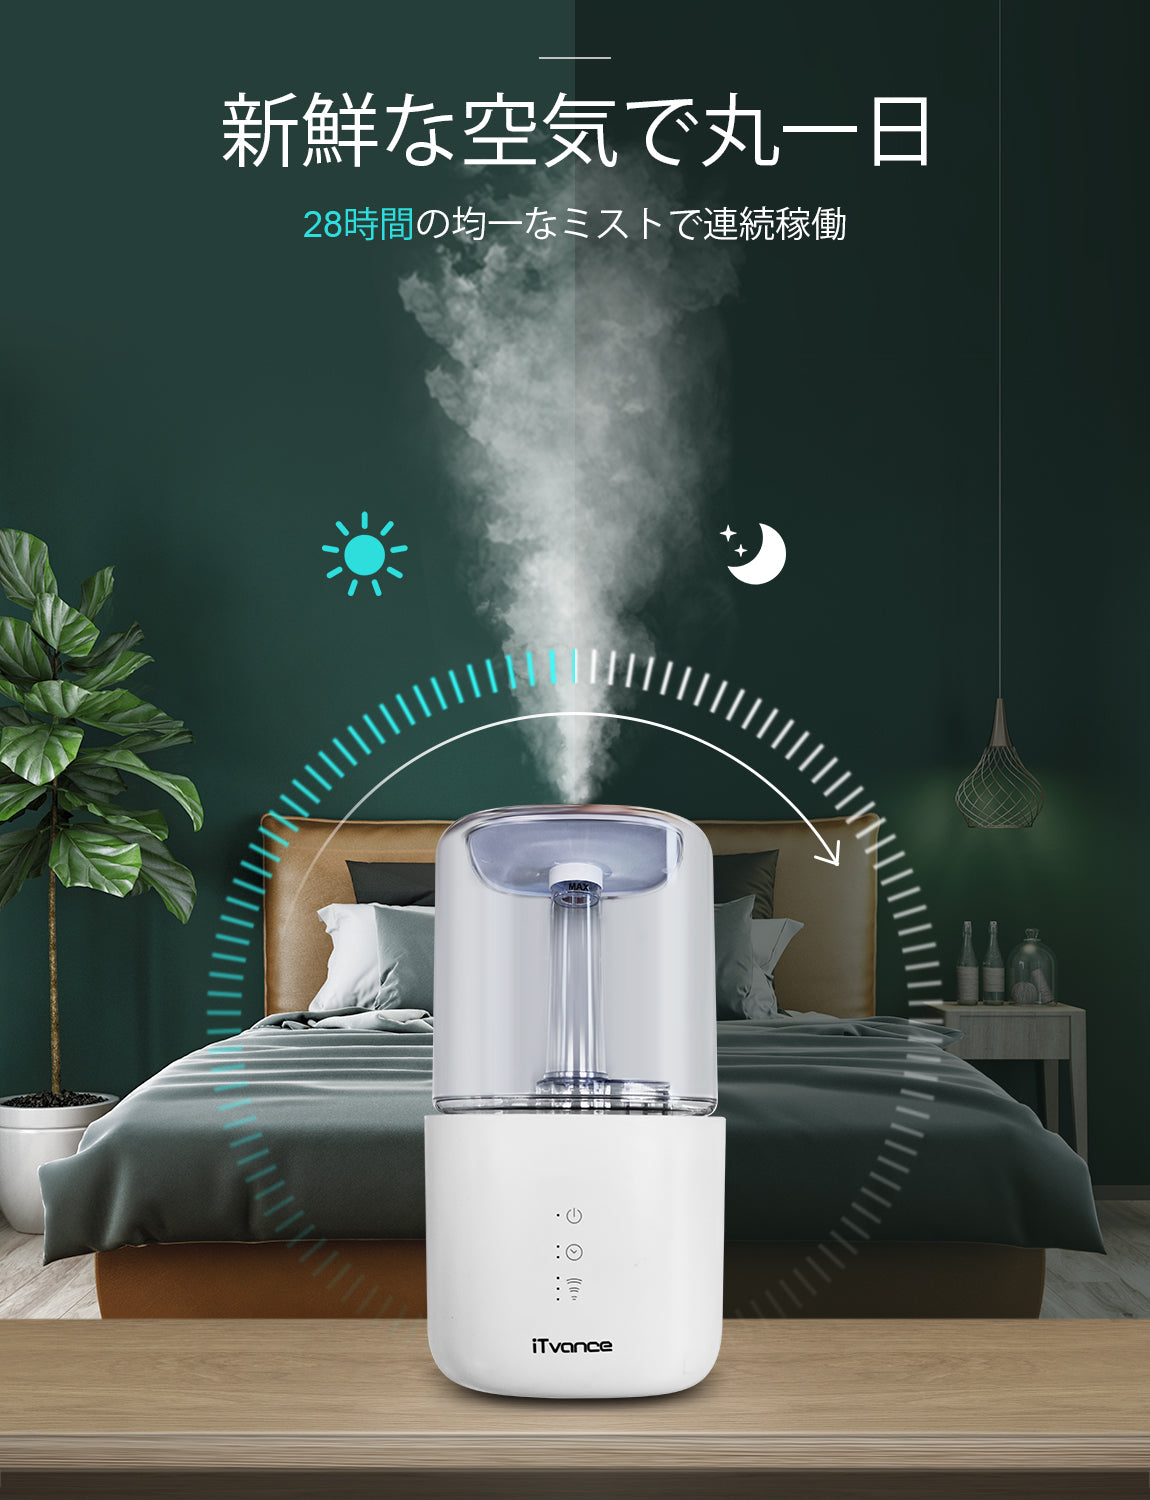 iTvance Humidifier, Bedroom Cold Mist Humidifier, 4.5L Gal Baby Humidifier, Output Adjustable, Lasts to 30 Hours, Whisper-Quiet, Auto Off, Filterless Humidifier for Home Office, White